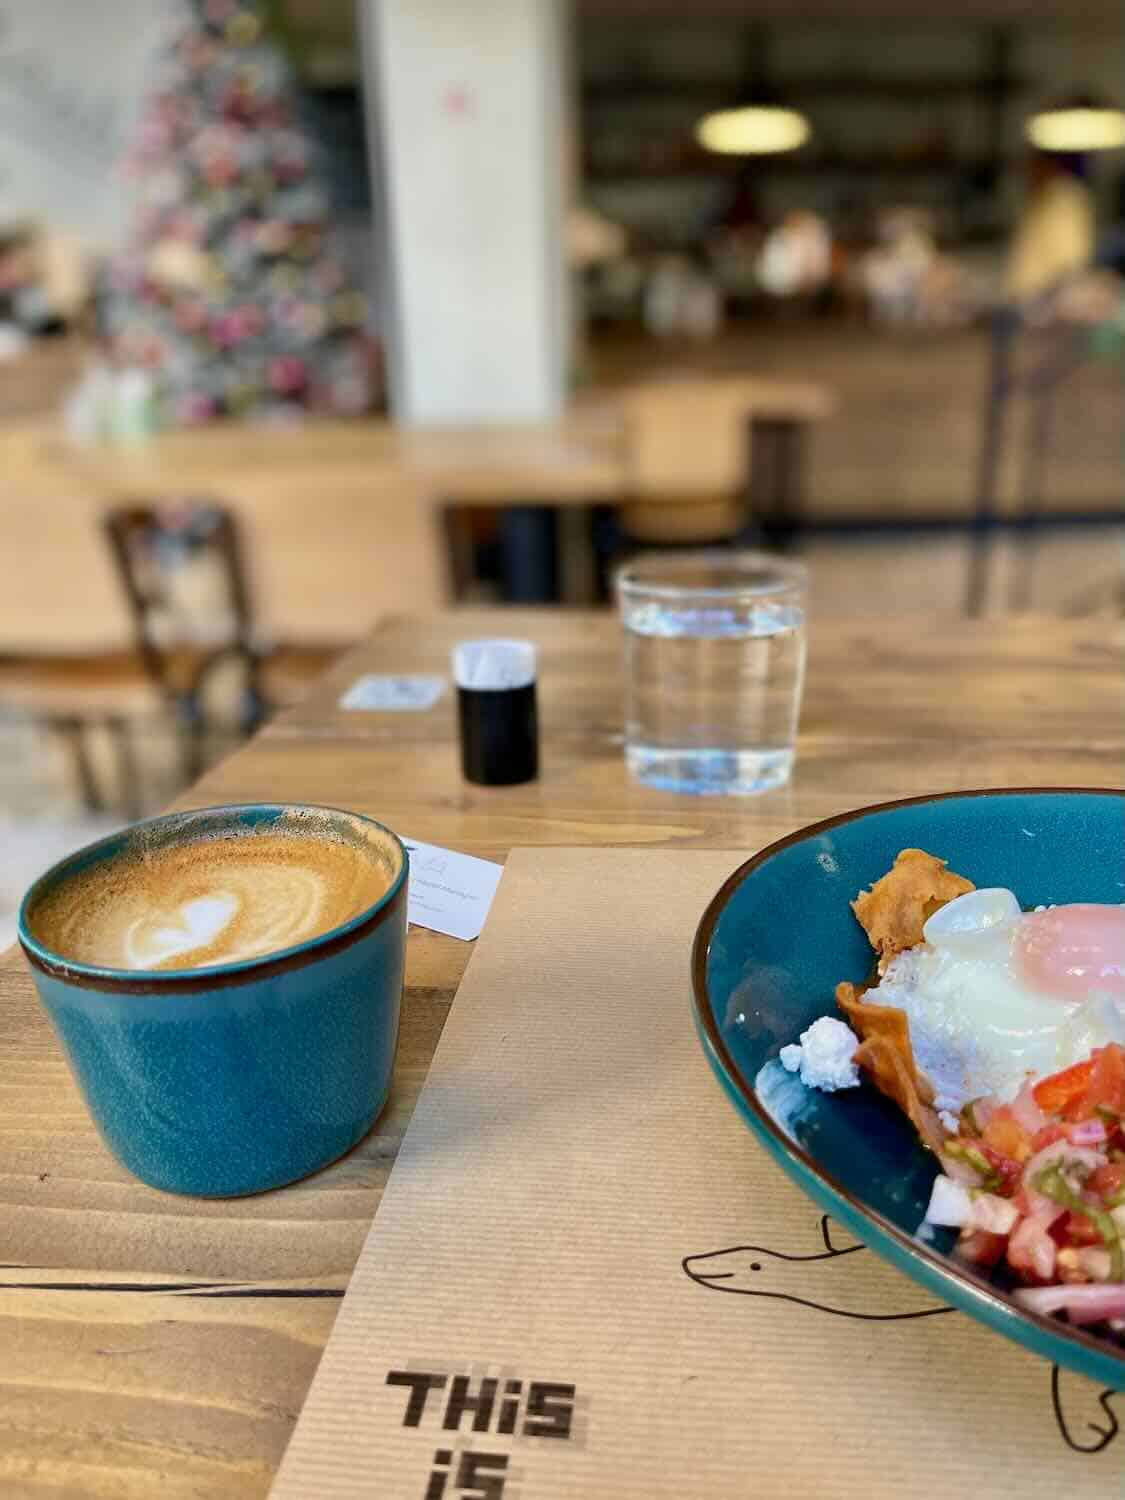 A table with a teal cup of cappuccino, a glass of water, and part of a breakfast dish with poached eggs, salsa, and yogurt. The background features a cozy café interior with a Christmas tree visible in the distance.